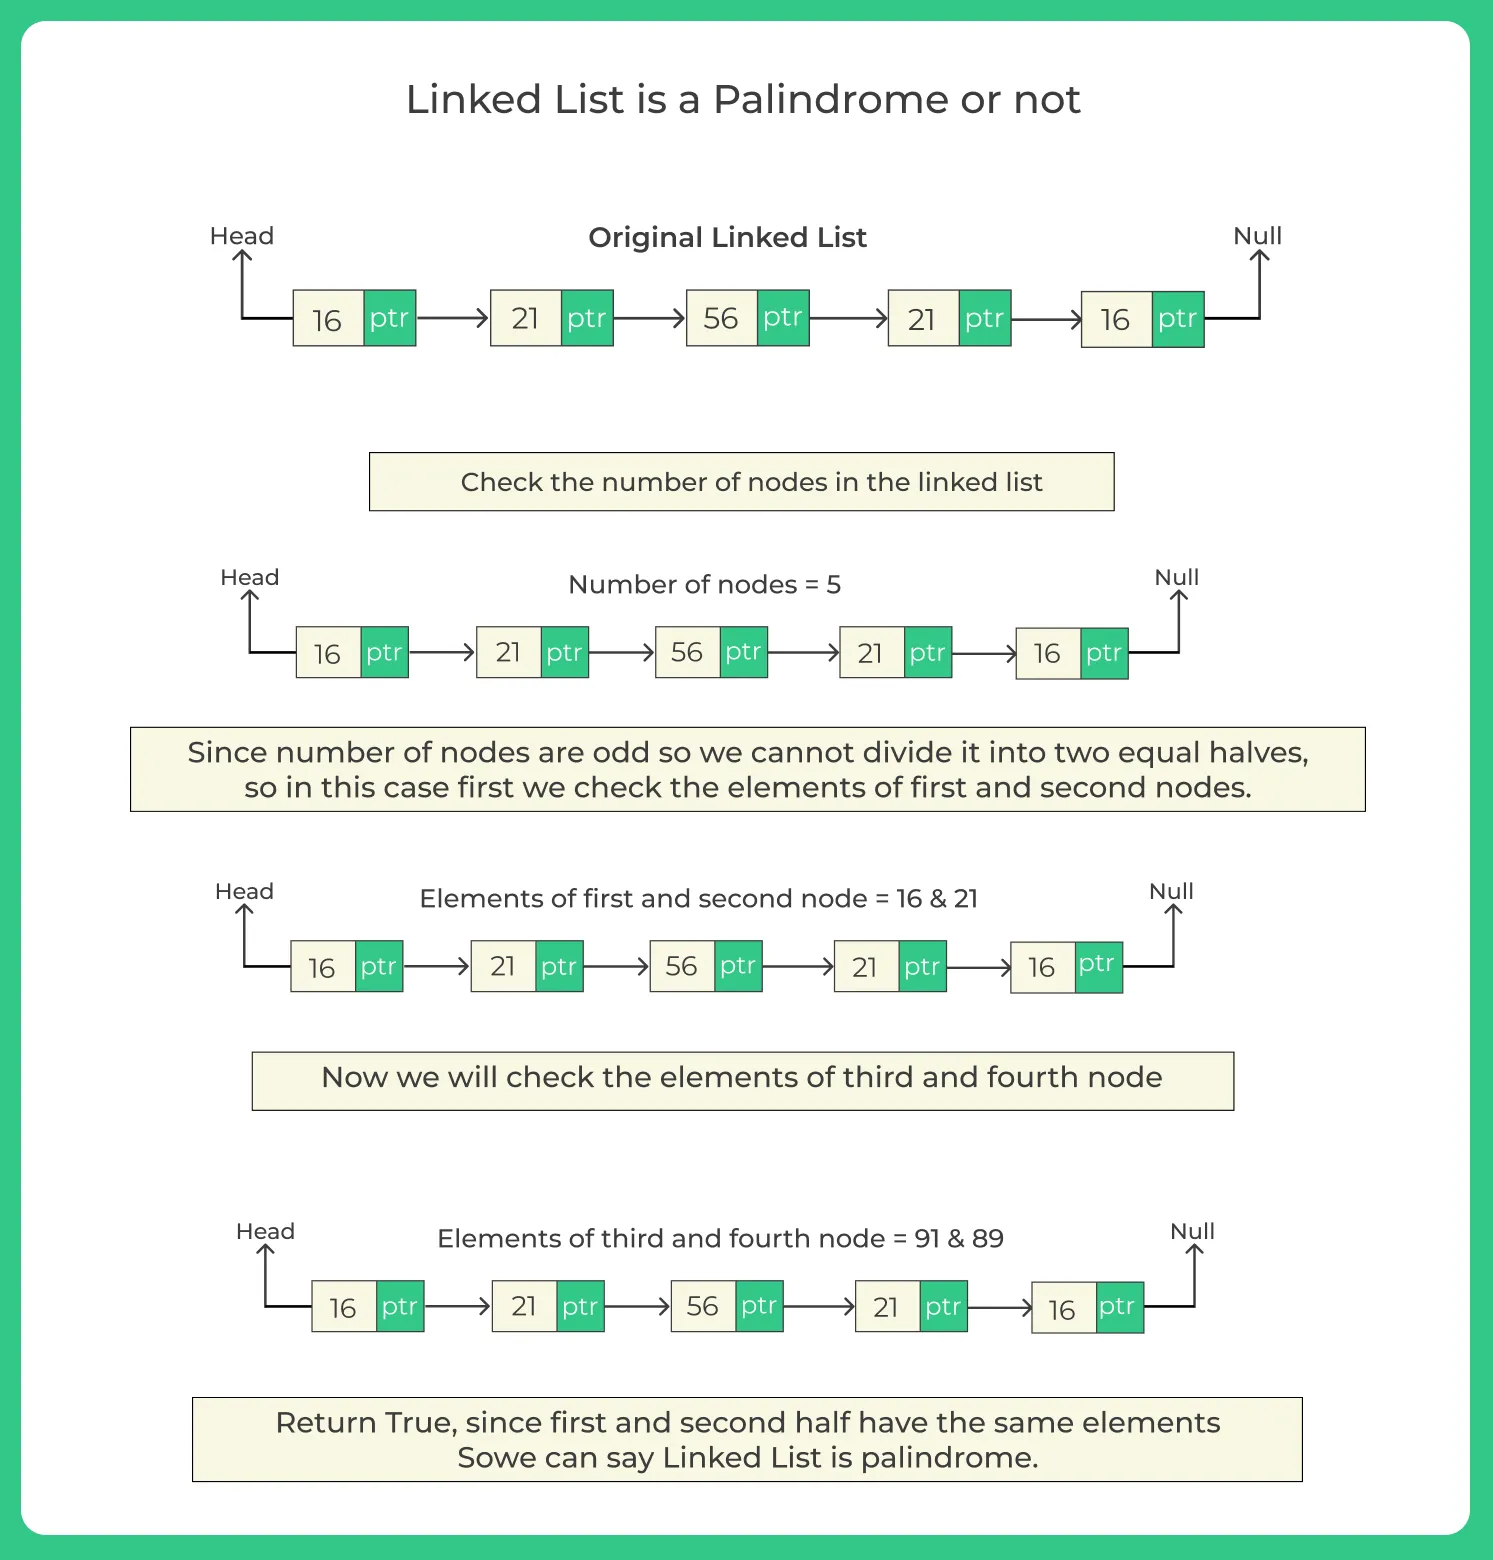 Linked List is a Palindrome or not